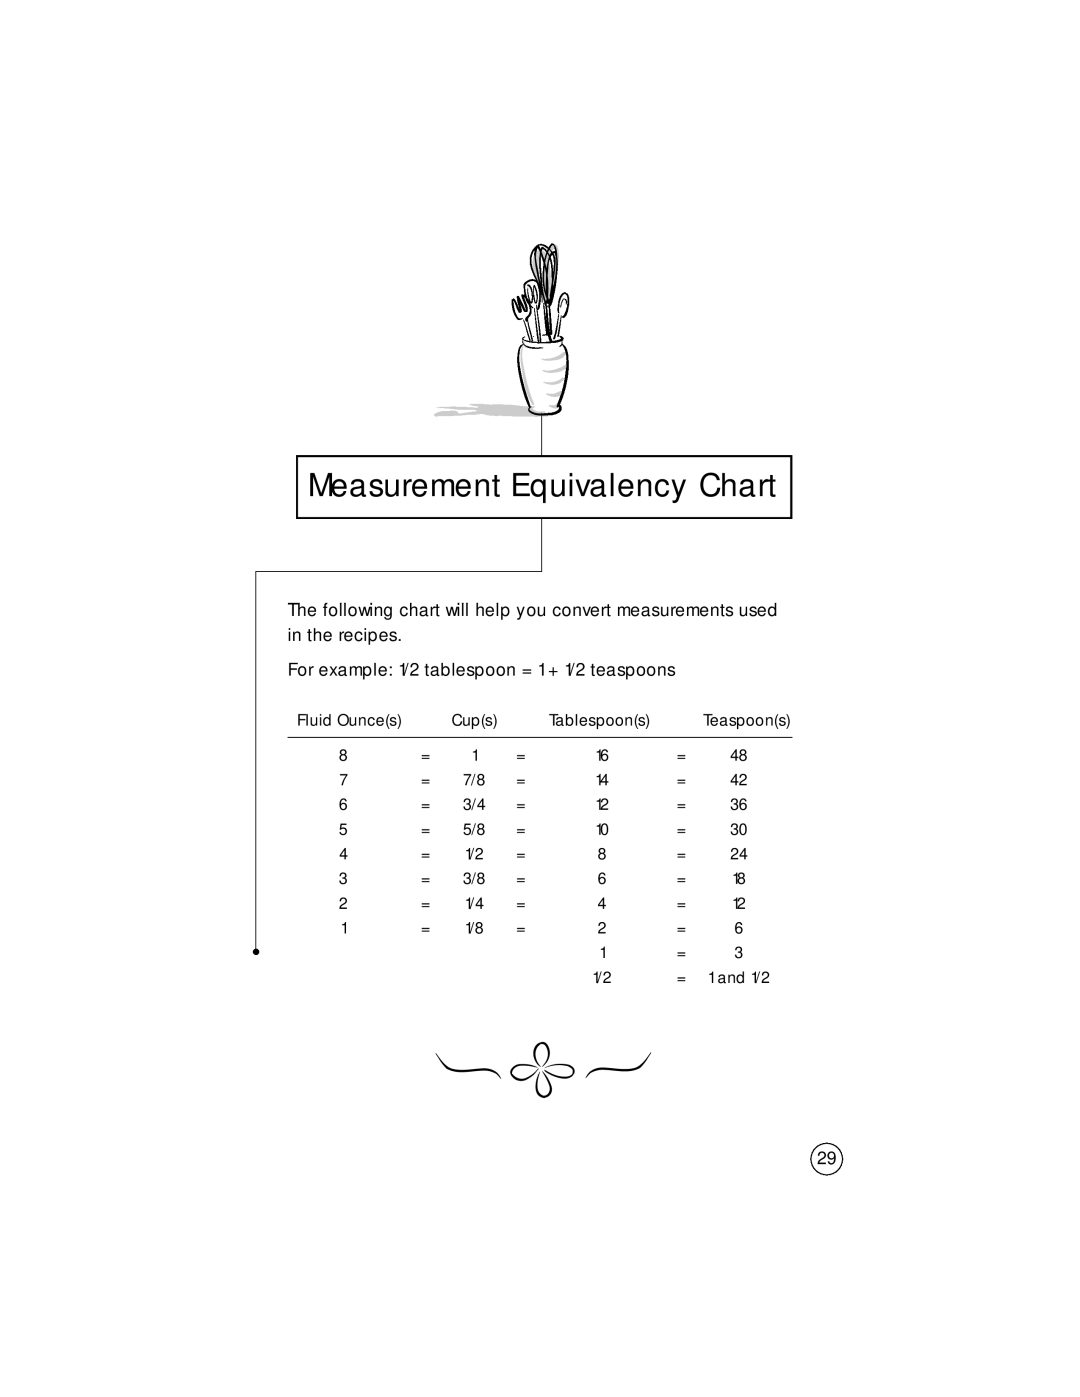 Sunbeam 102817, 5834 user manual Measurement Equivalency Chart, For example 1/2 tablespoon = 1 + 1/2 teaspoons 